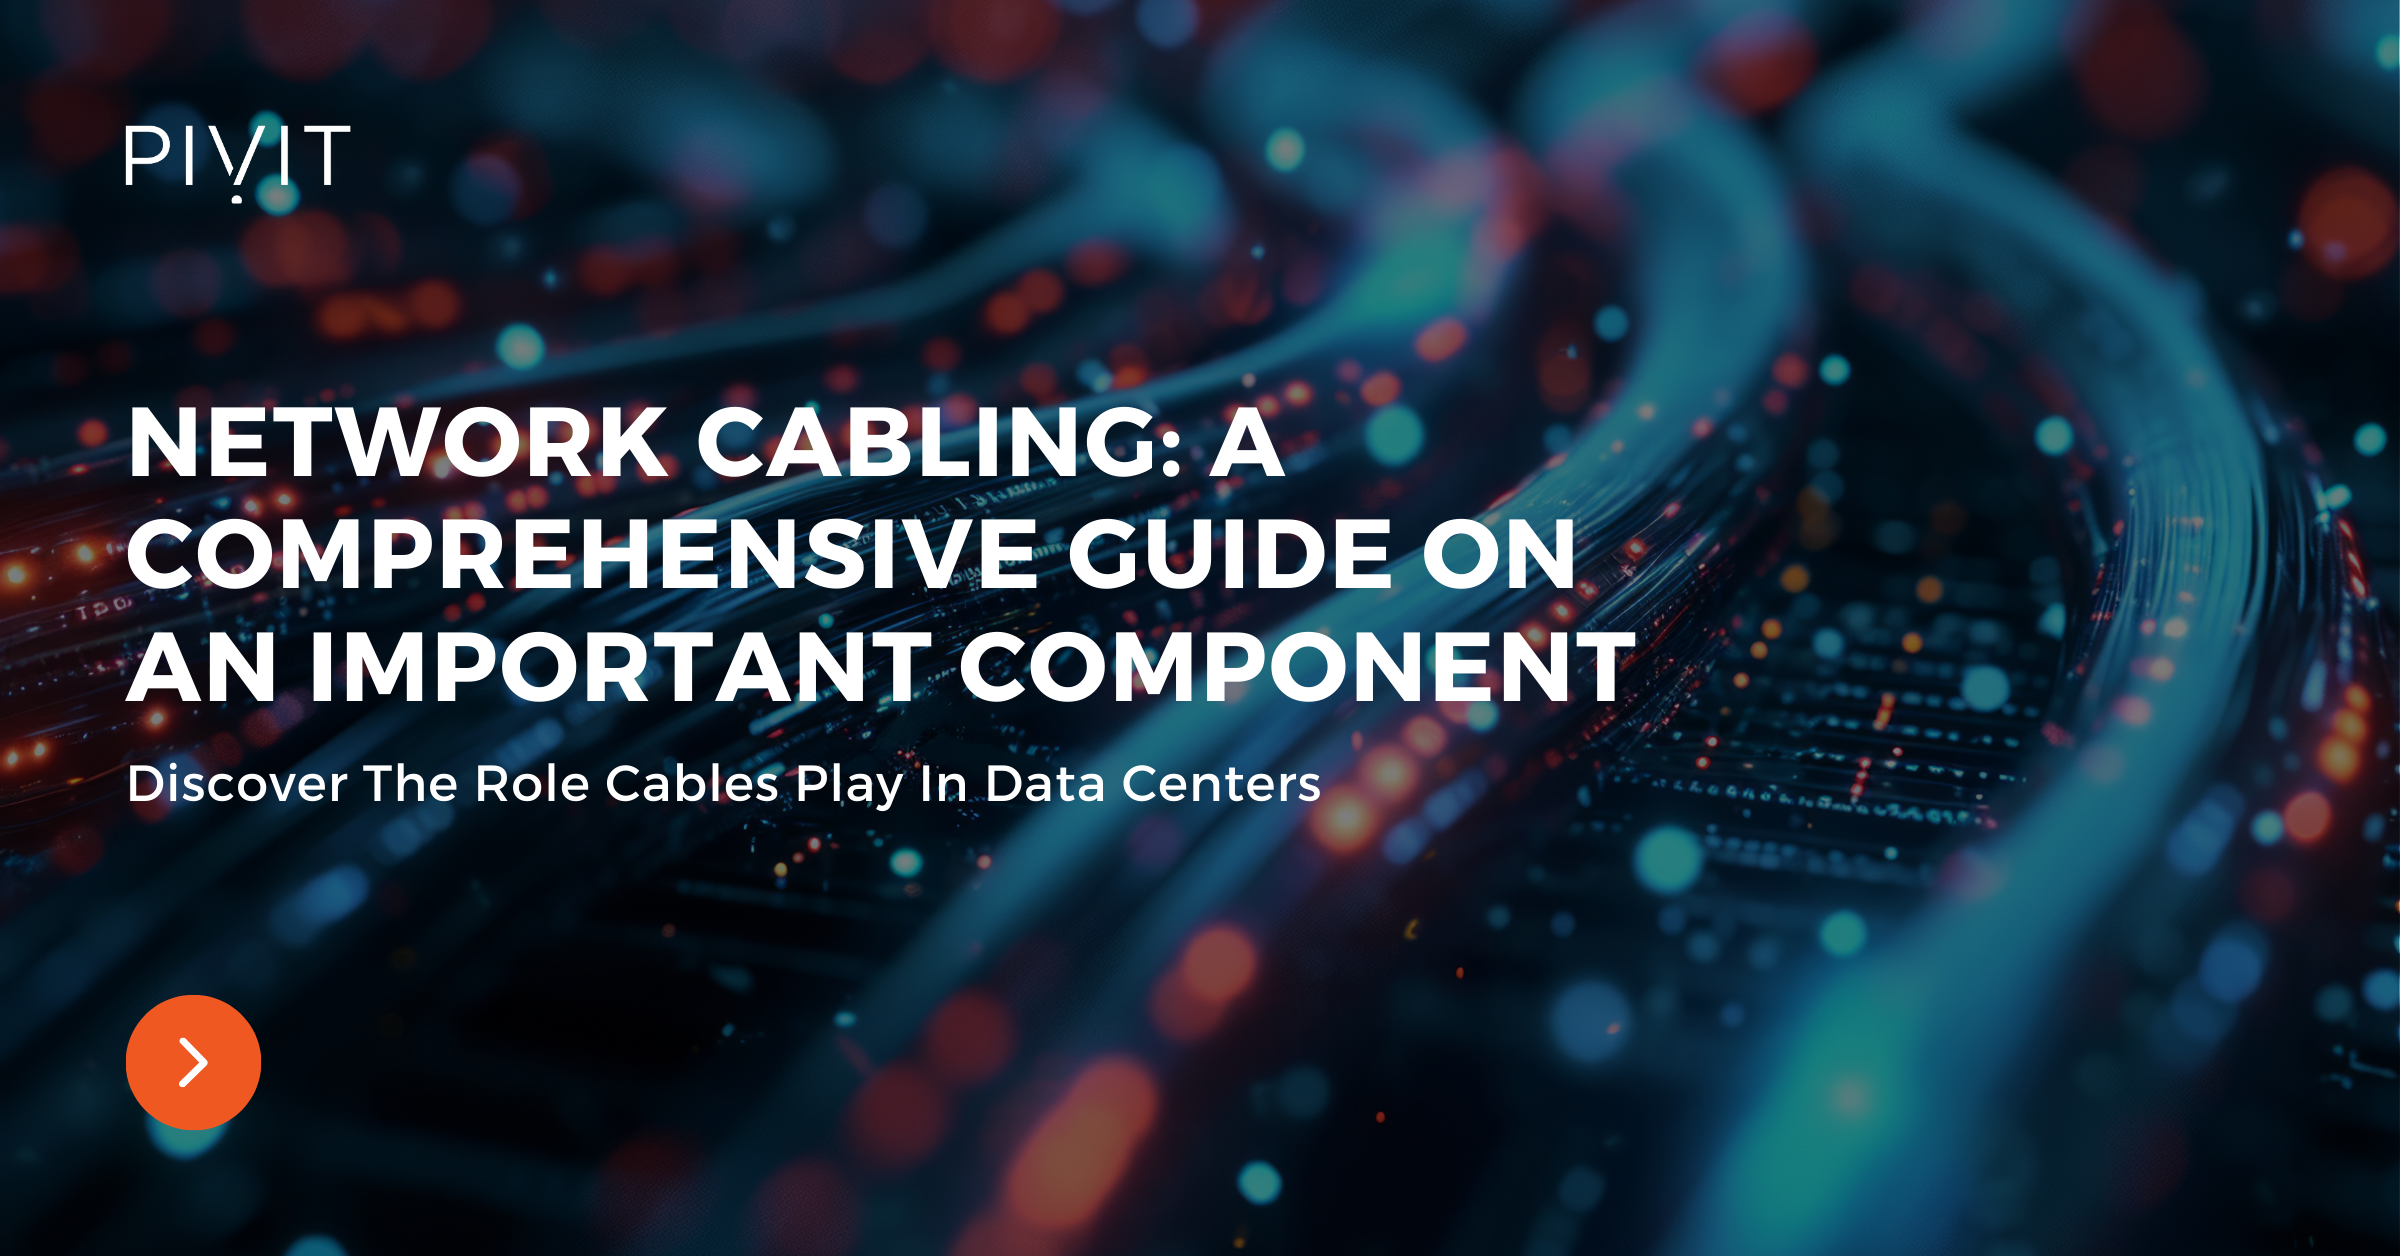 Discover The Role Cables Play In Data Centers - Network Cabling: A Comprehensive Guide On An Important Component